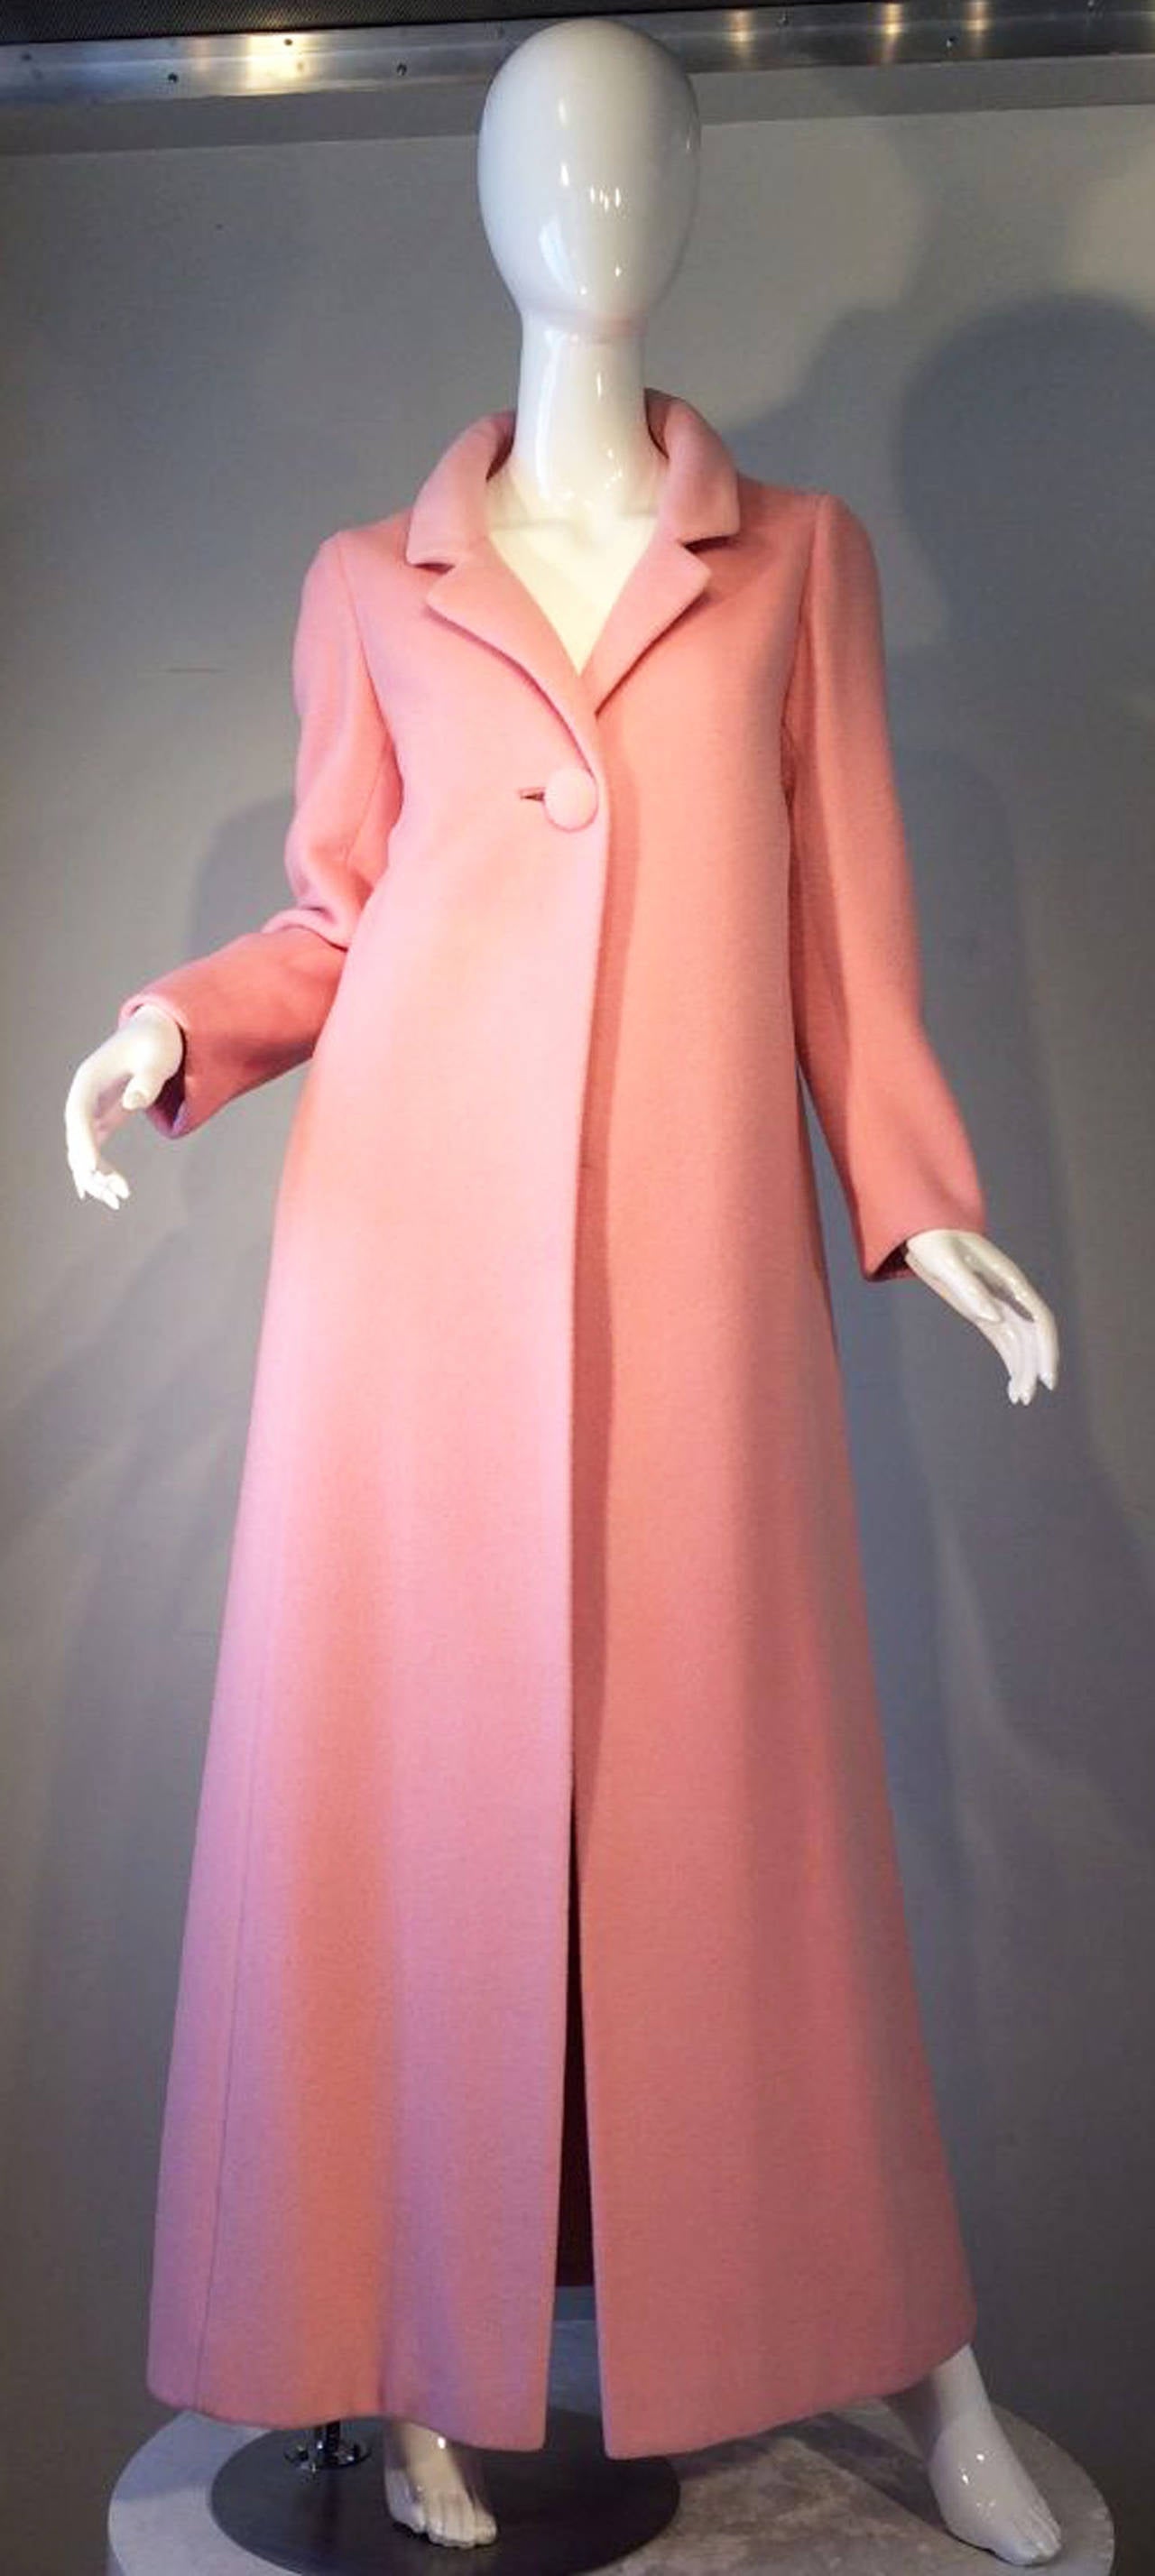 A fine vintage Anne Klein princess length coat. Early AK design for Junior Sophisticates circa 1965. Pale pink wool item fully silk crepe lined with single matching fabric covered button closure. A charming example of American sportswear influenced